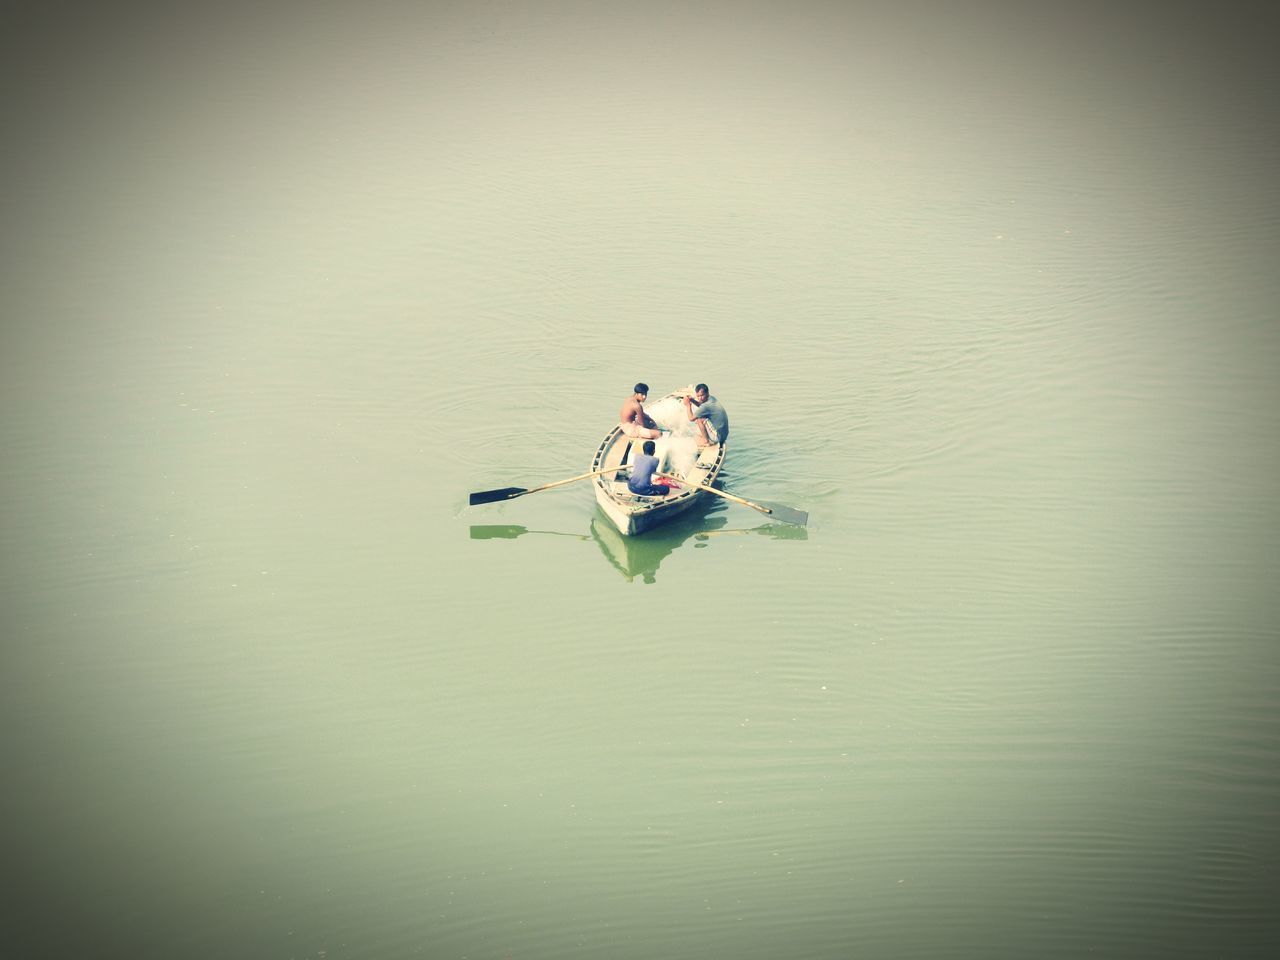 PEOPLE IN BOAT AT LAKE